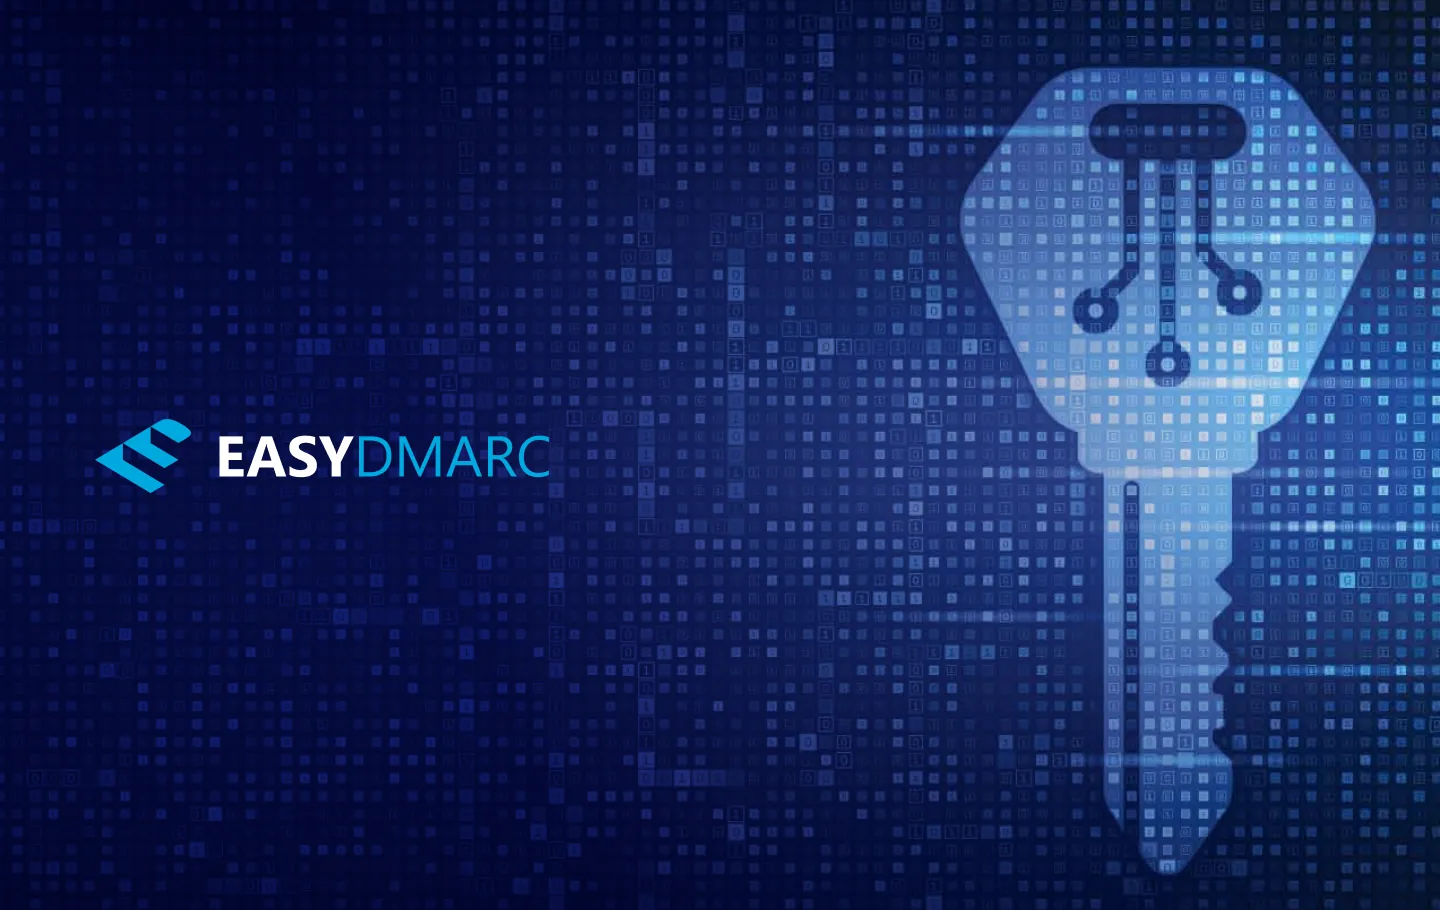 A big key image on the right side of the picture, EasyDMARC logo on the left side